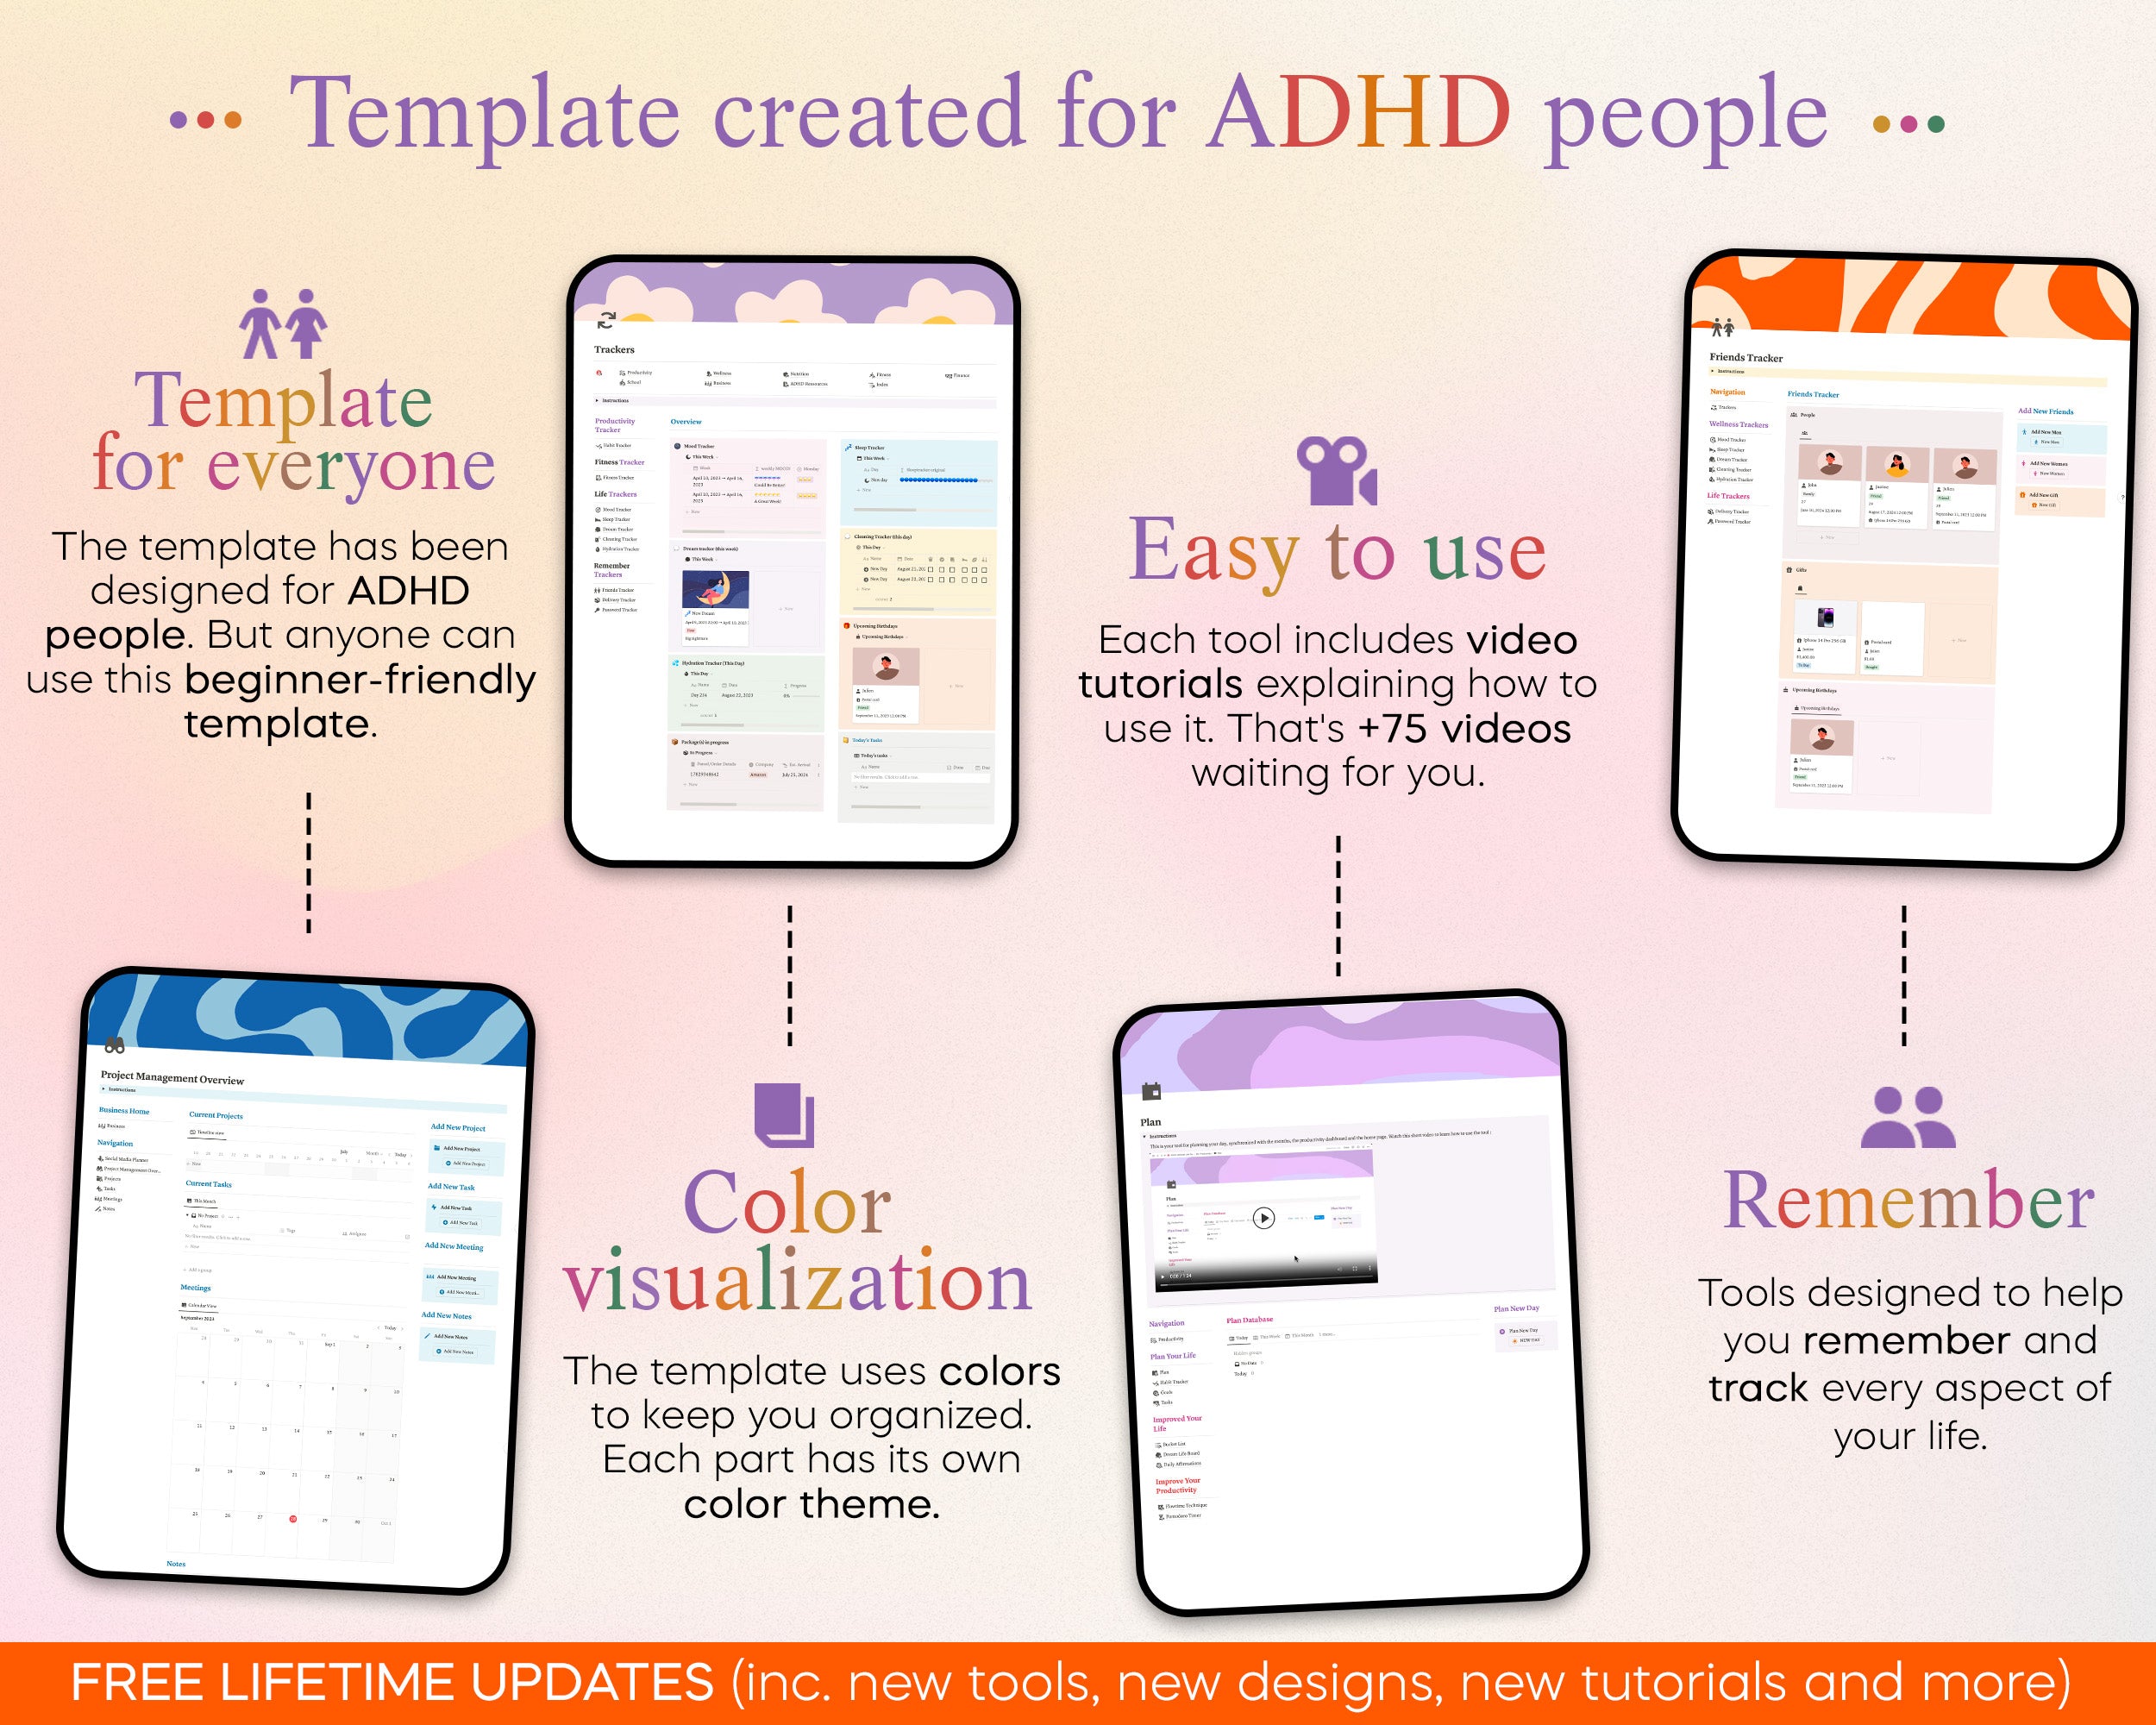 ADHD Life Planner Notion Template